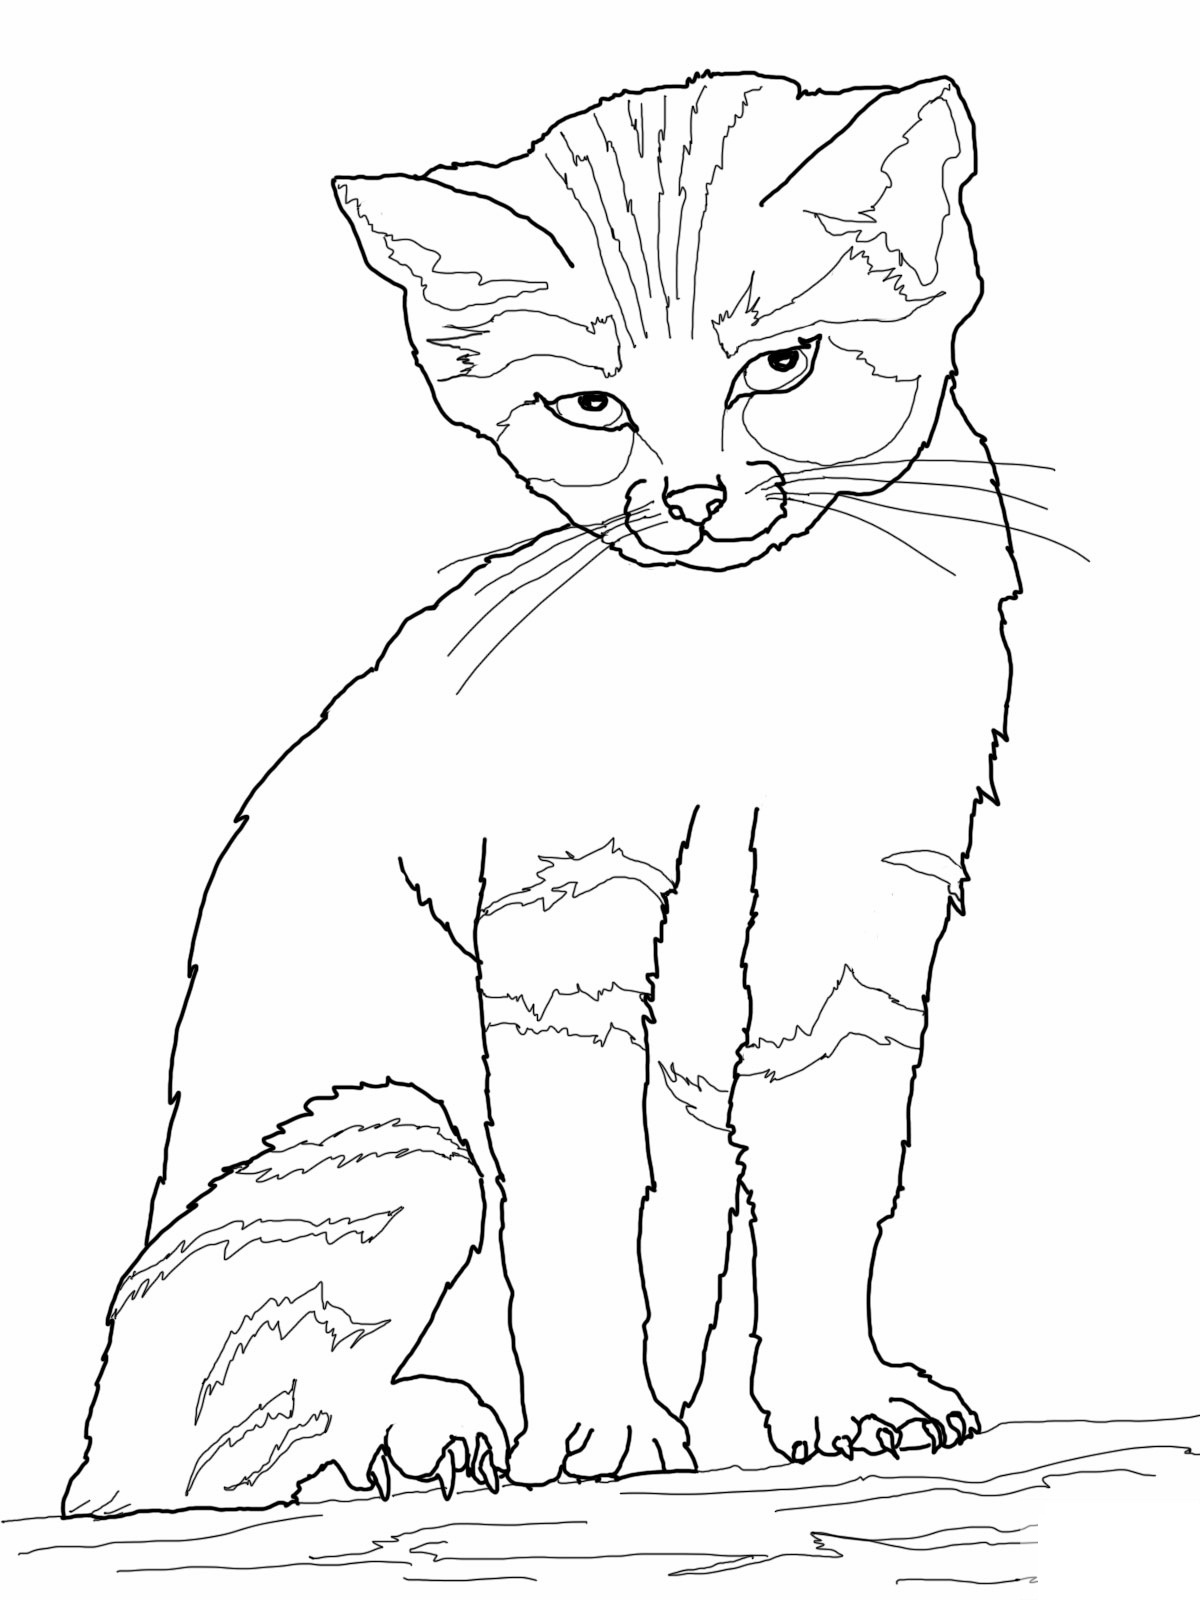  Crazy Cat Coloring Pages | Cats Coloring pages | Cool cats